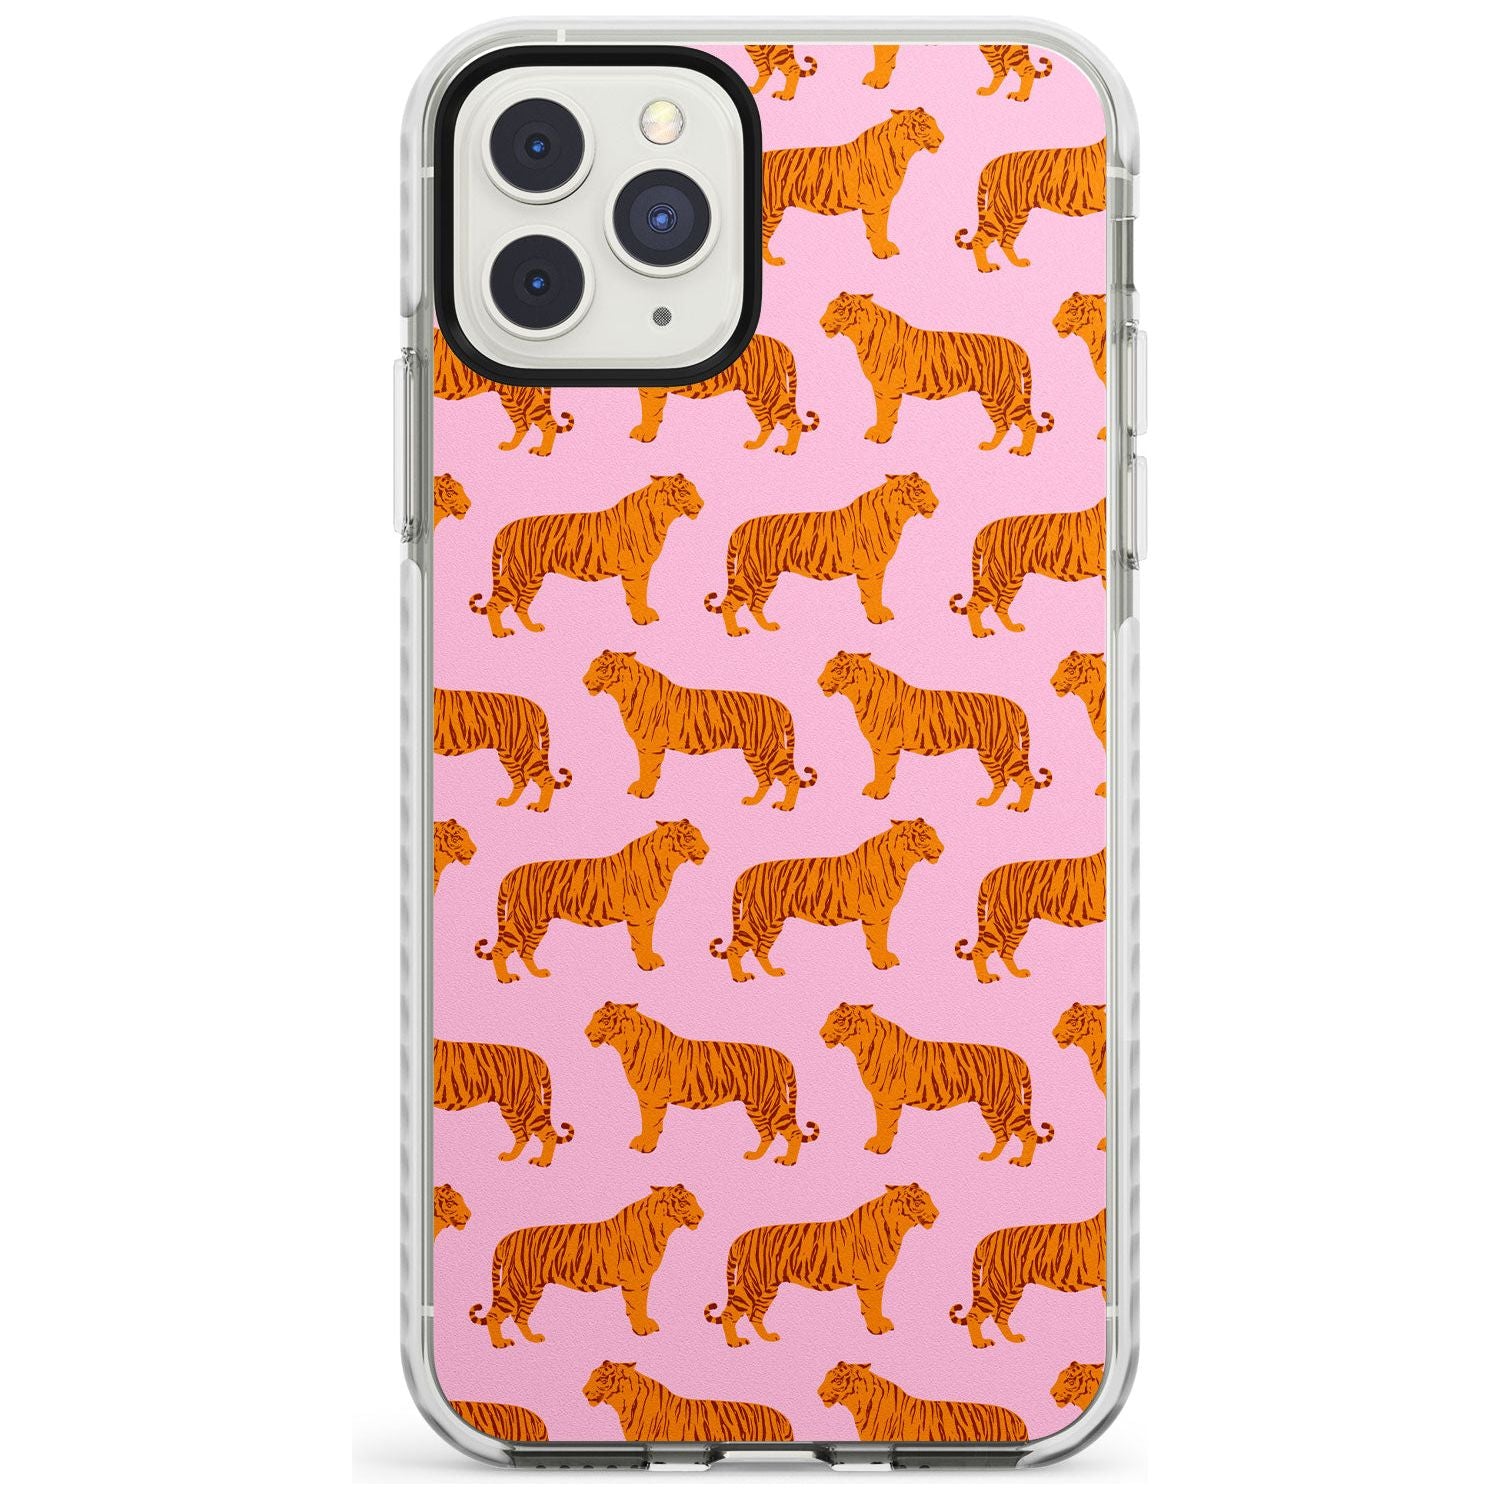 Tigers on Pink Pattern Impact Phone Case for iPhone 11 Pro Max